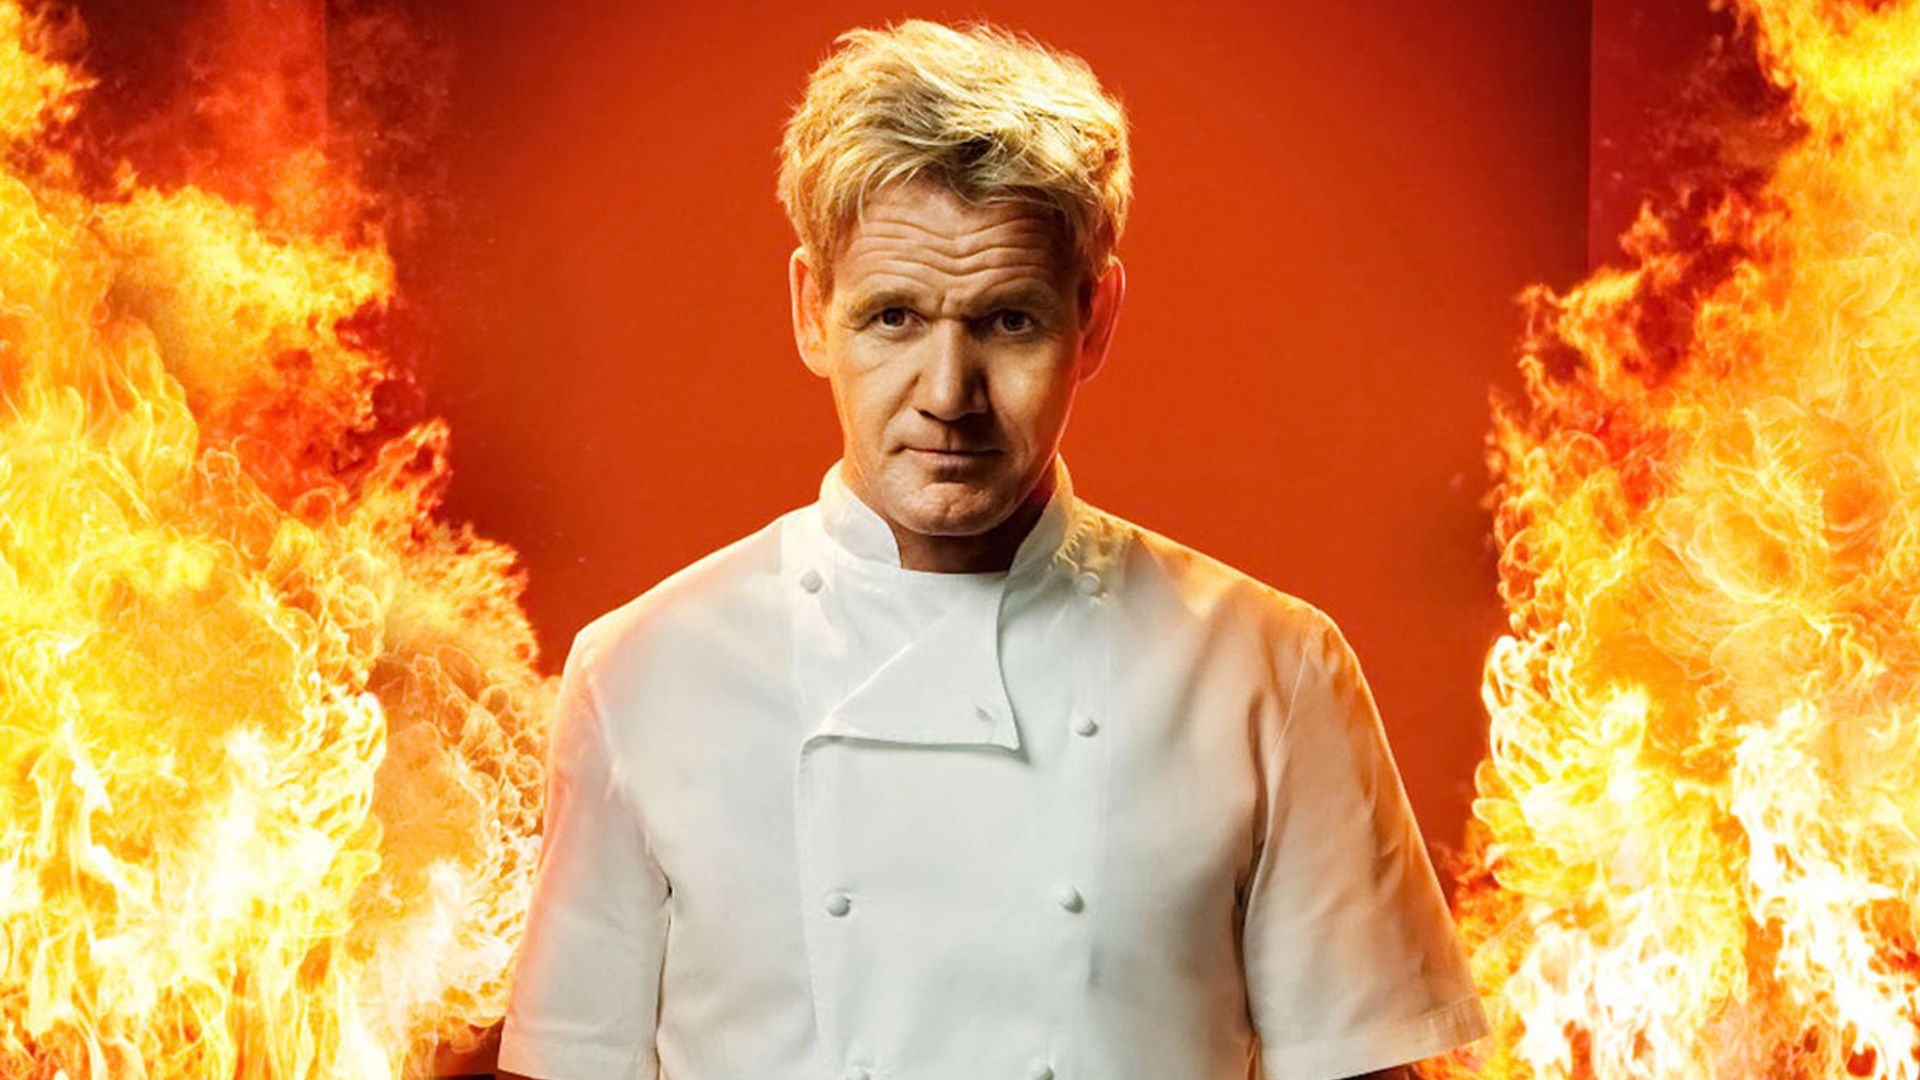 Gordon Ramsay confuses fans with epic birthday celebrations for daughter